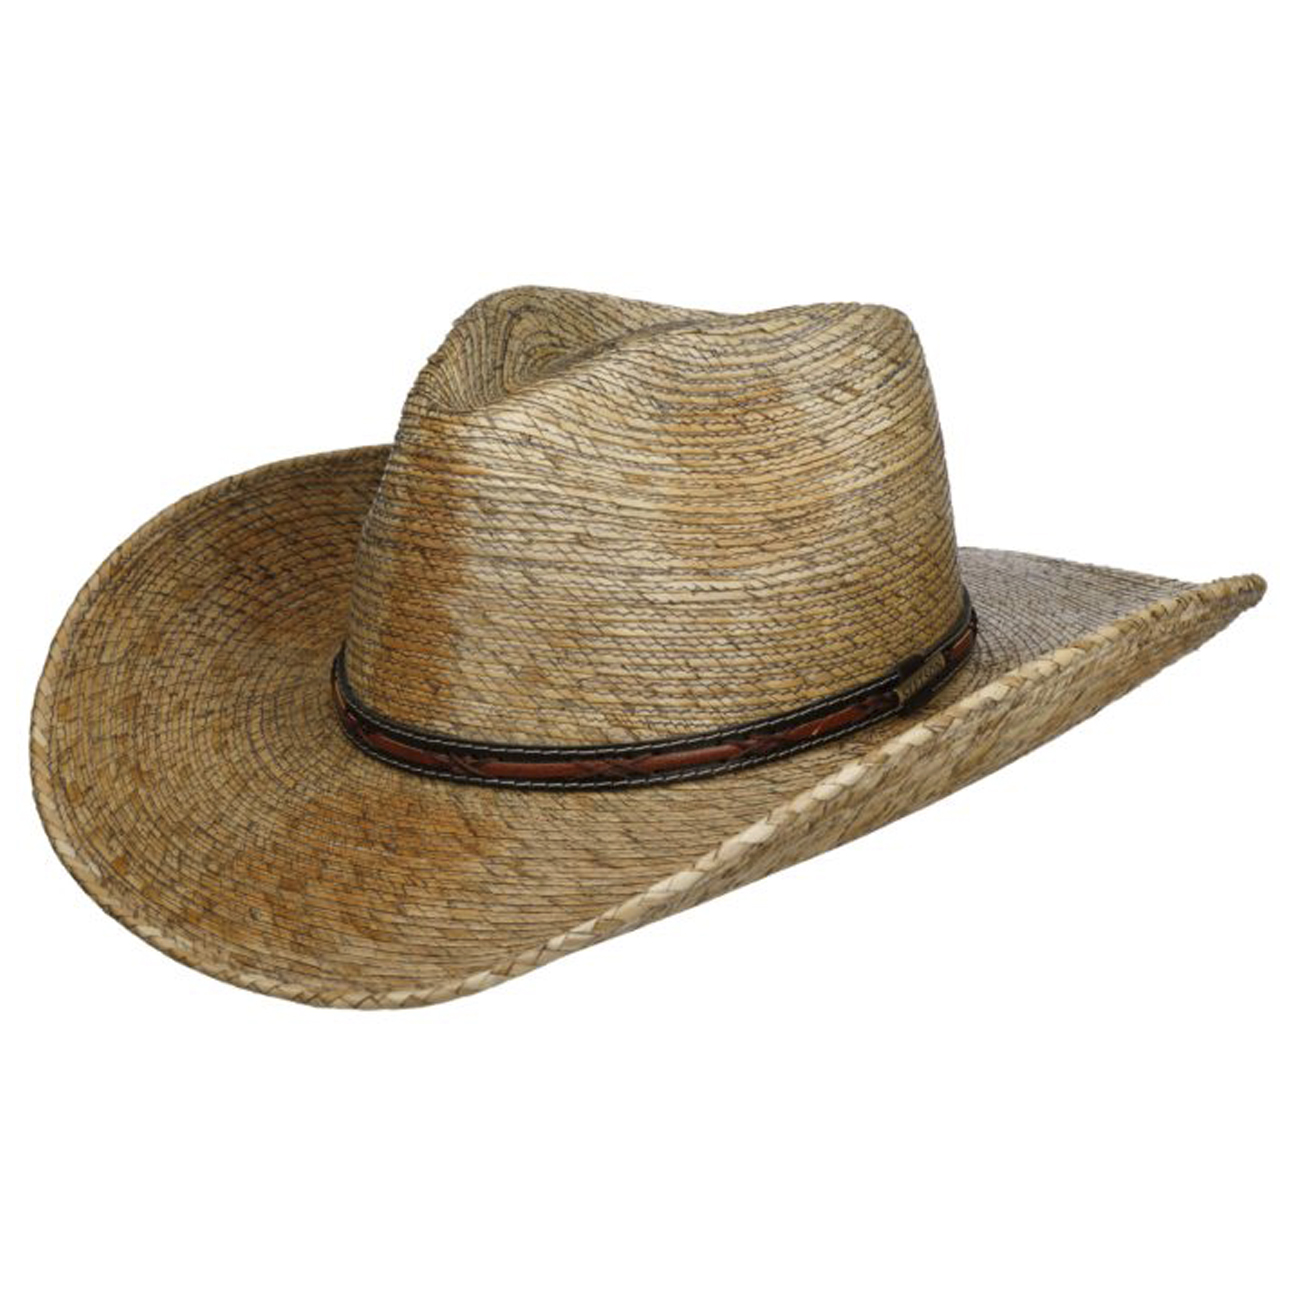 Stetson---Mexican-Western-Straw-Cowboy-Hat---Nature